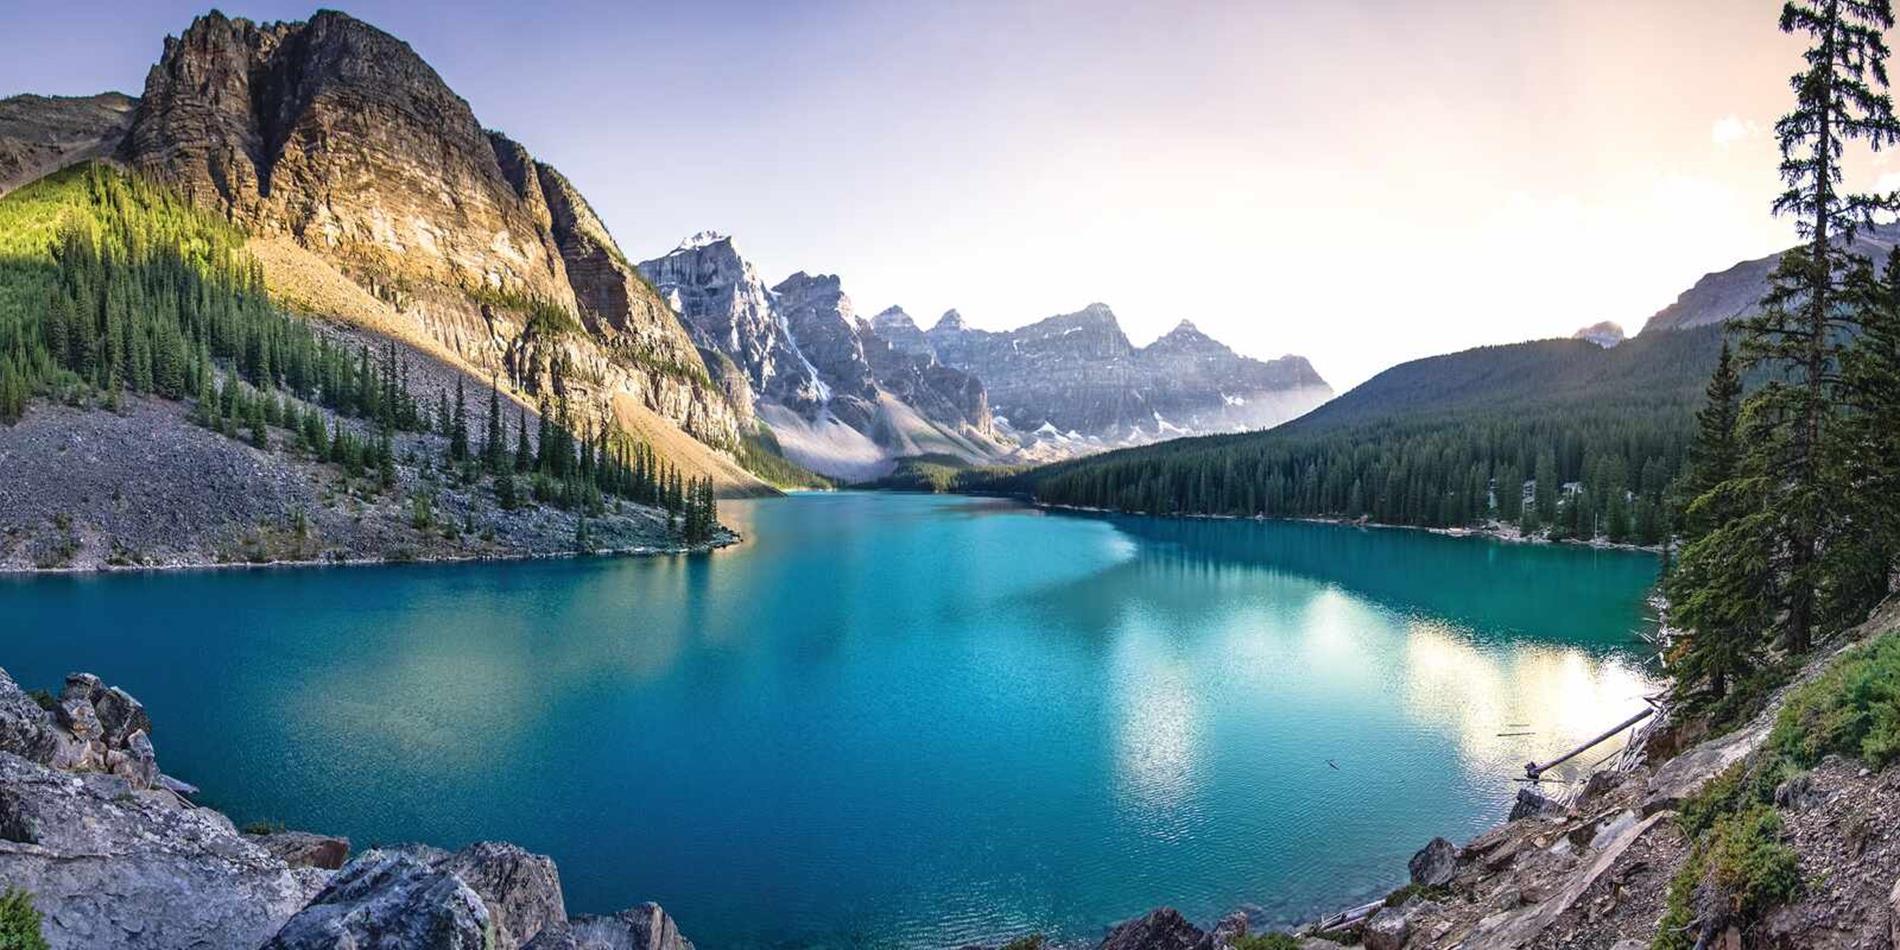 View of blue lake surrounded by mountains, Canada